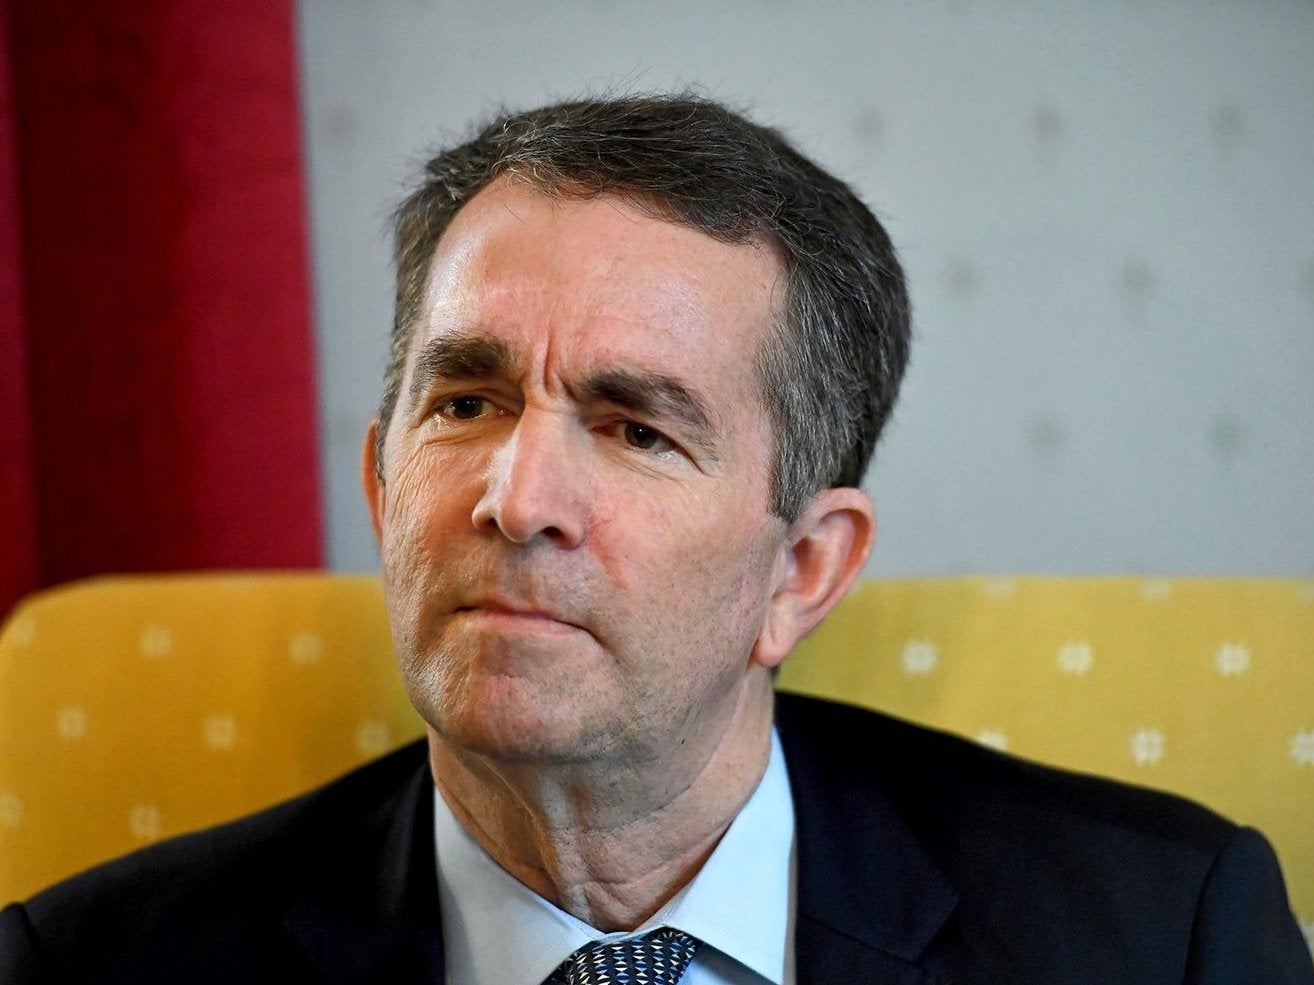 Virginia Gov. Ralph Northam talks during an interview at the Governor's Mansion, Saturday 9 February 2019. A racist photograph surfaced on a medical school yearbook page belonging to Mr. Northam who denied appearing in the photo, but admitted to darkening his face another time.